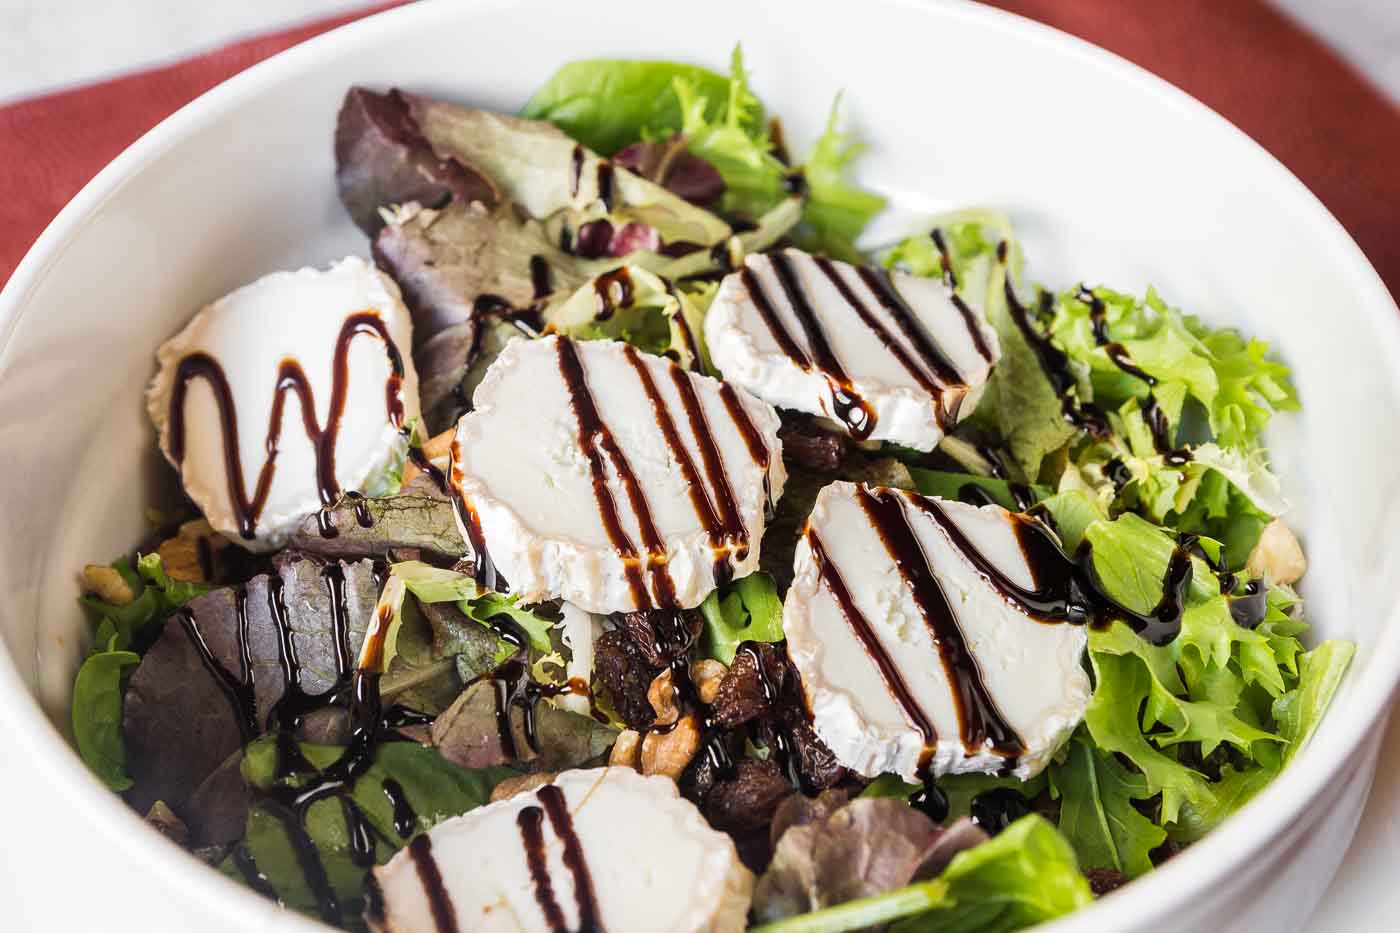 Mixed Greens with Goat Cheese, Raisins and Vinegar PX